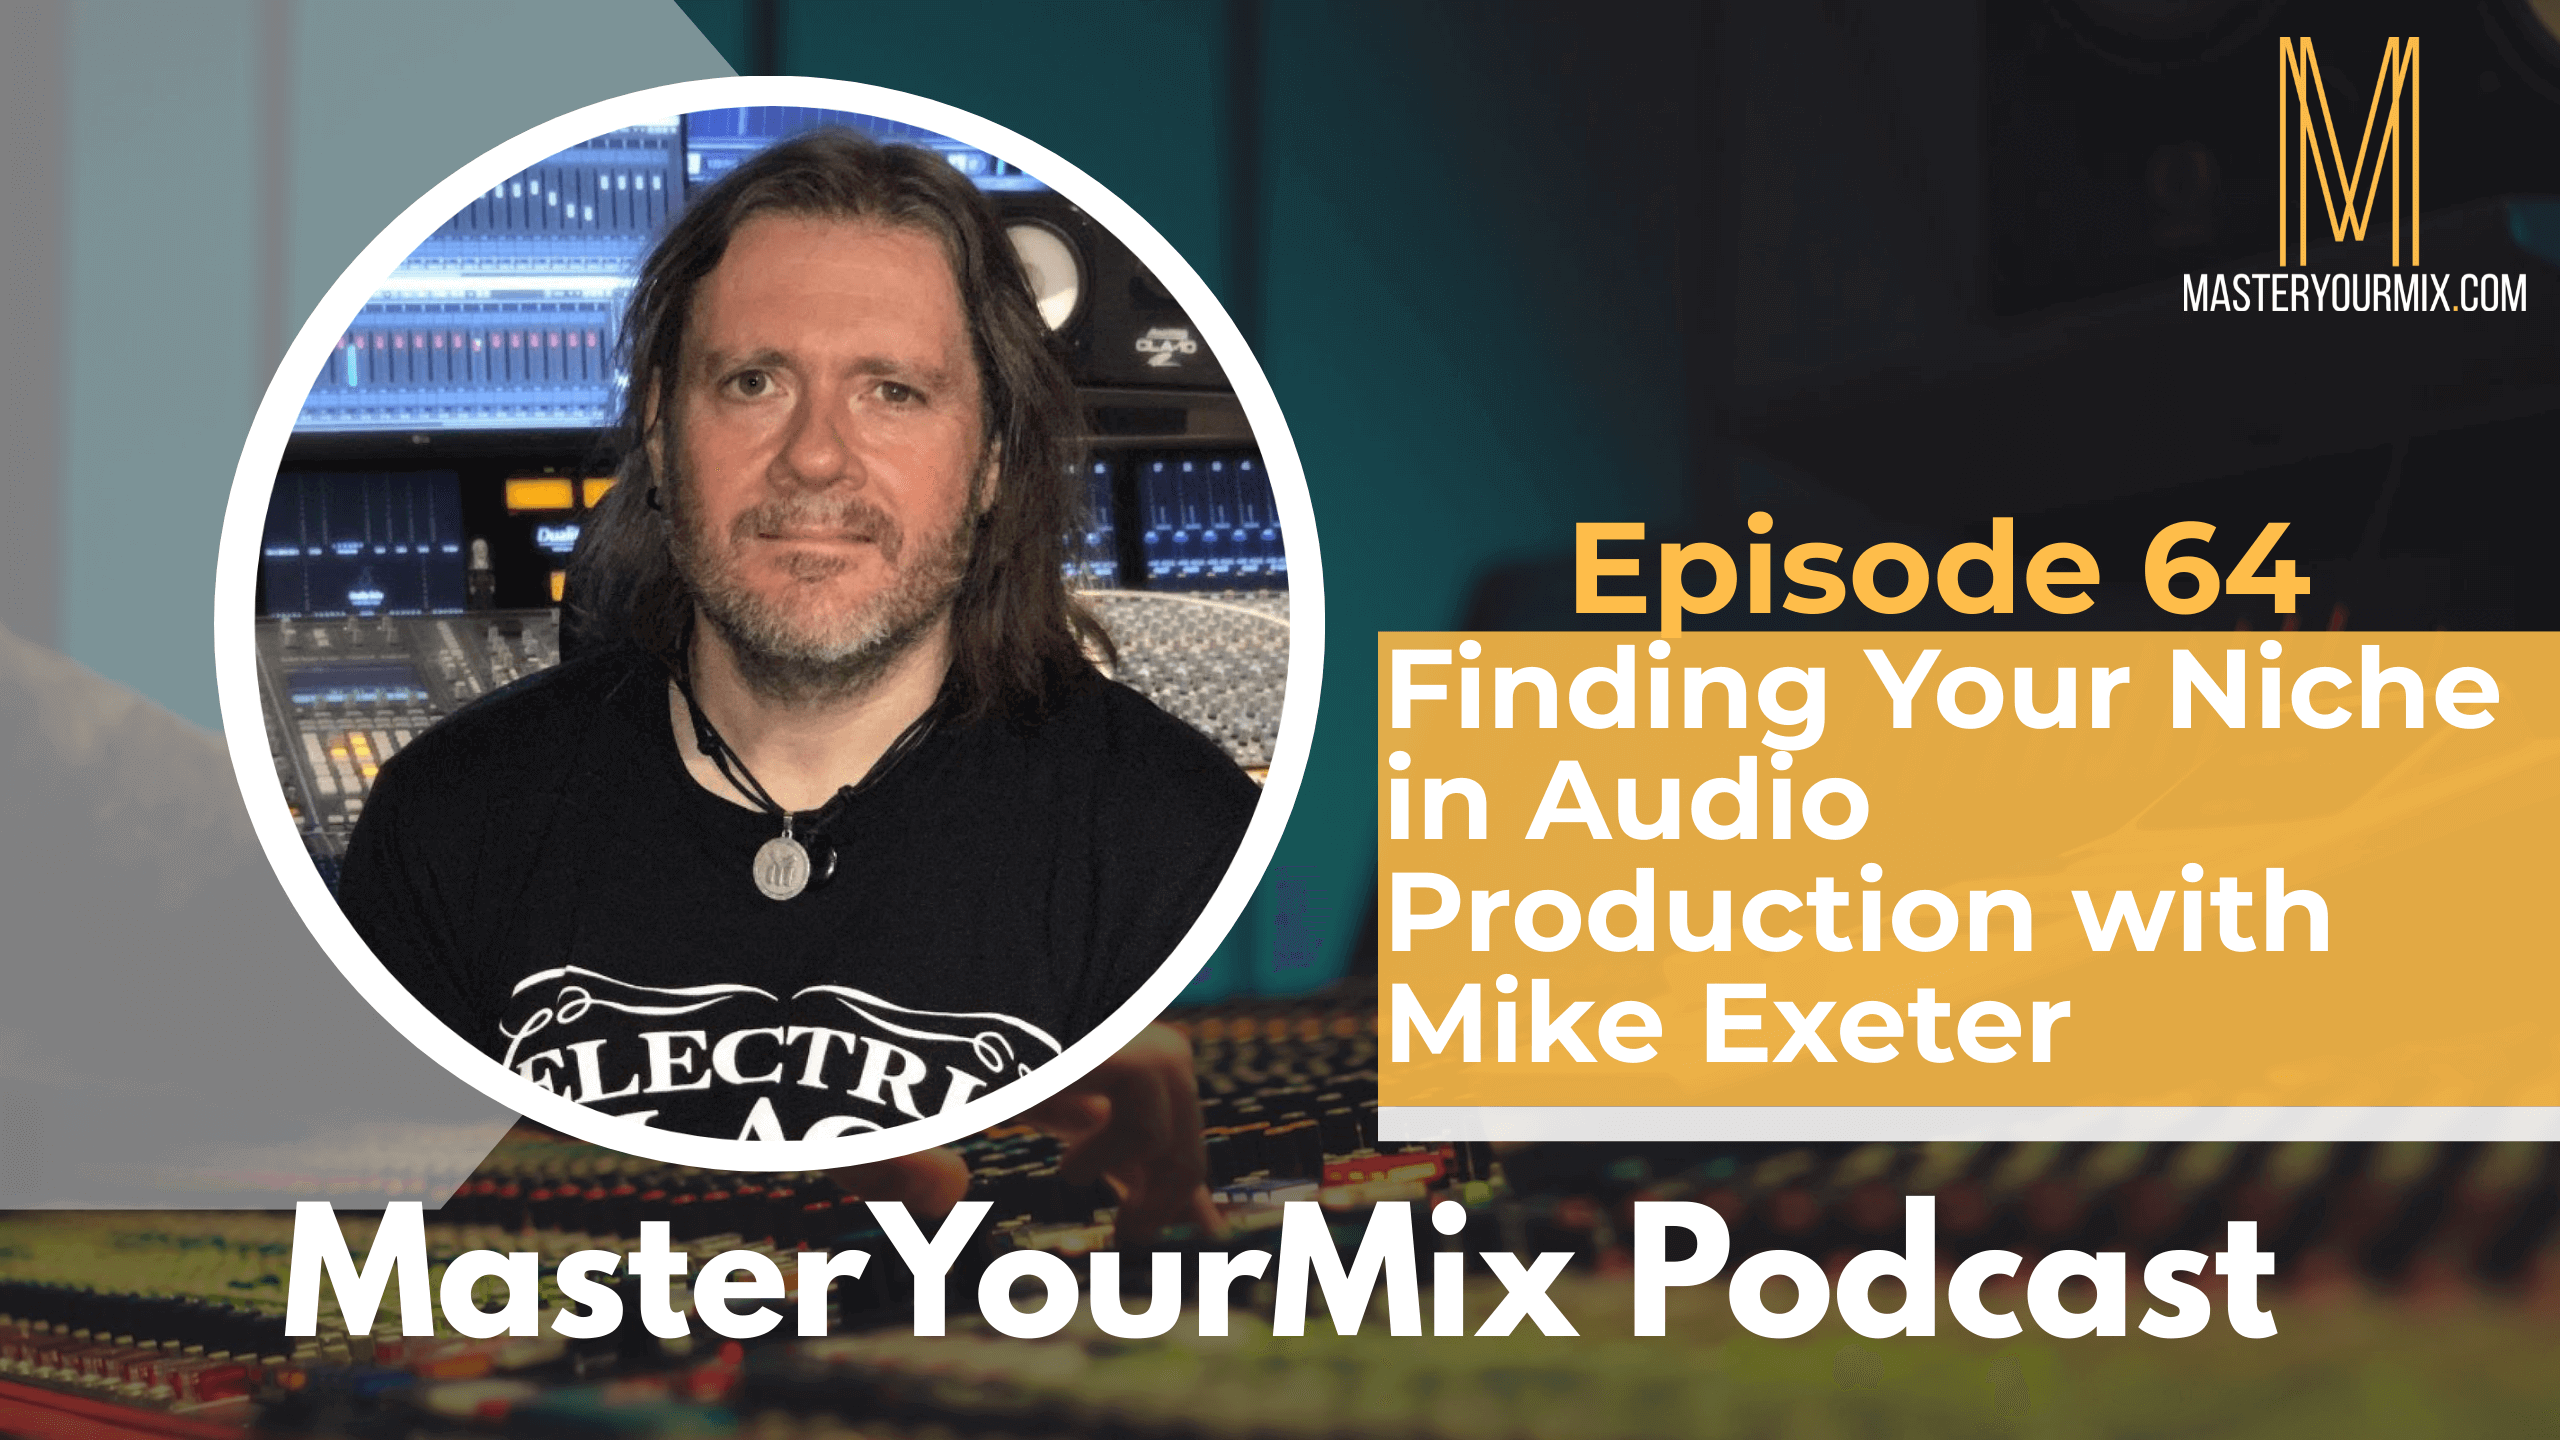 master your mix podcast, ep 64, mike exeter